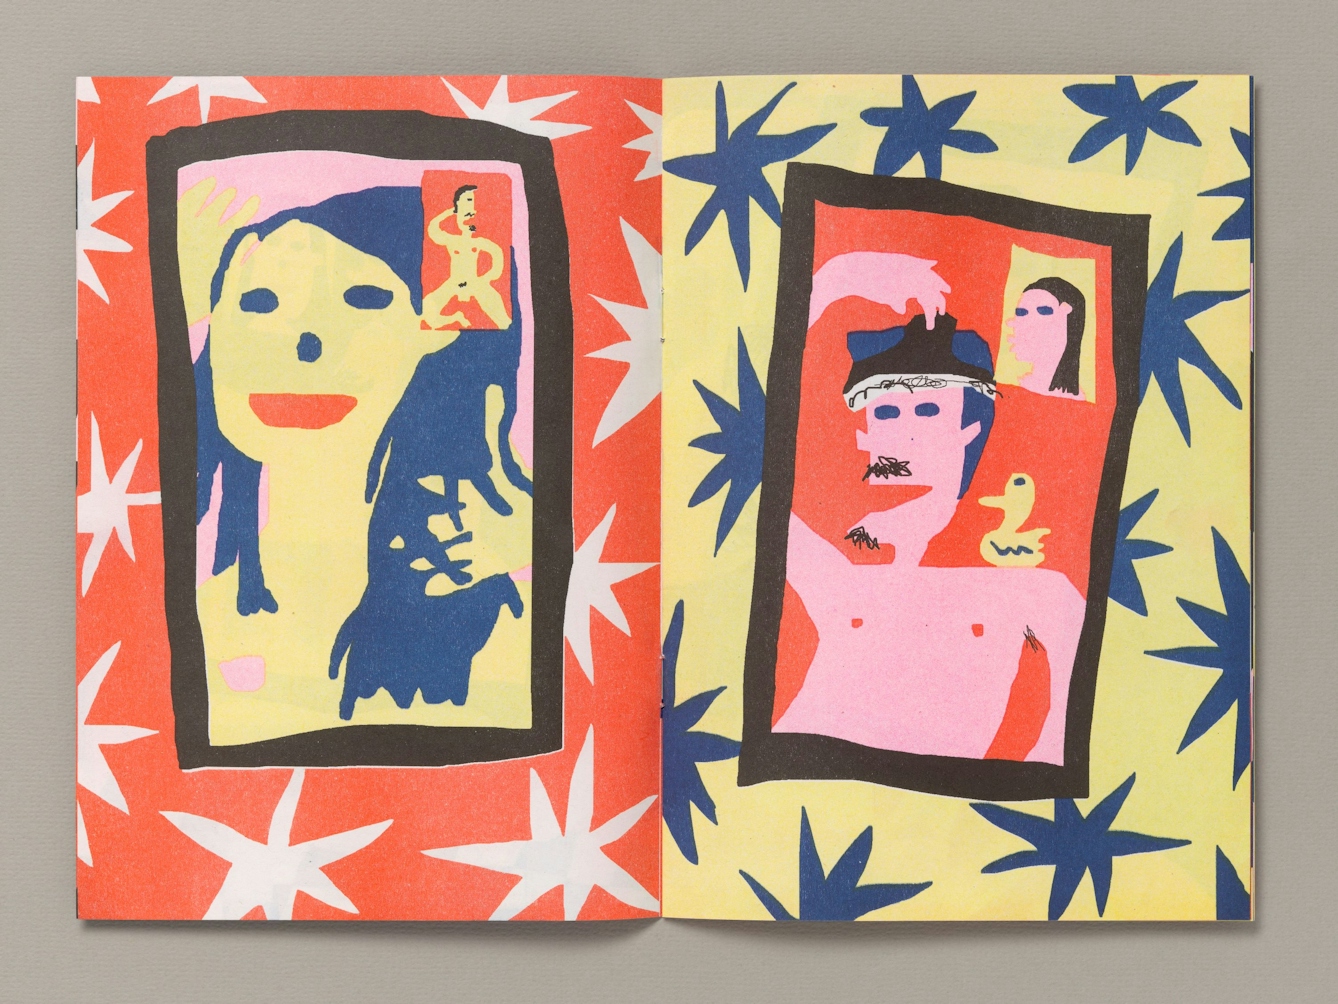 A double page spread from the zine 'Facetime love' by Kento Okawara. The left  side is a crudely painted figure of the head and shoulders of a woman with long hair and a red mouth framed by a heavy black rectangle. In the top right of the rectangle is a much smaller red rectangle containing a painted figure of a naked man doing a full-frontal pose. The main rectangle is surrounded by a red background with white stars. On the right side is another black-framed rectangle on a yellow background with blue stars. Inside this rectangel is a topless male figure with a mustache and goatee and wearing his underpants on his head. He has a small yellow duck perched on his left shoulder. In the top right of this rectangle is a small yellow square containing the head of a woman iwth long hair.